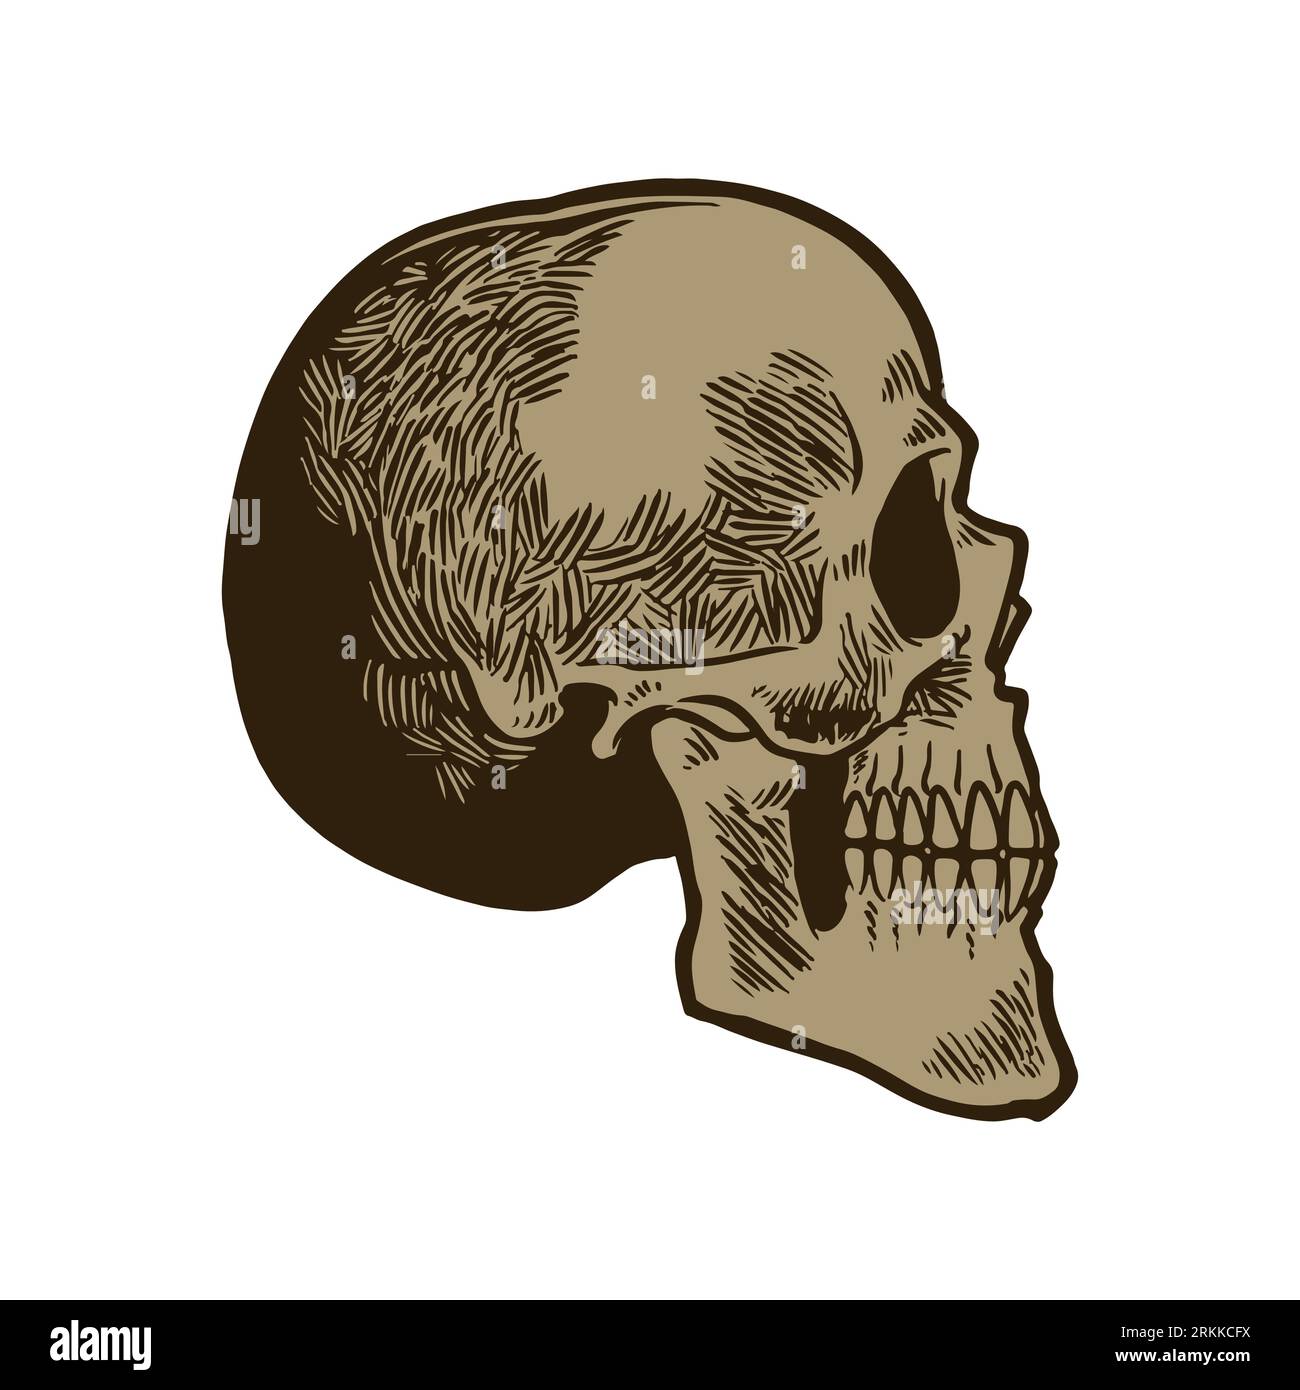 Hand drawn anatomic human skull vintage engraving sketch. Scary cranium isolated on white background. Can be used for t-shirt designing, poster, decor Stock Vector